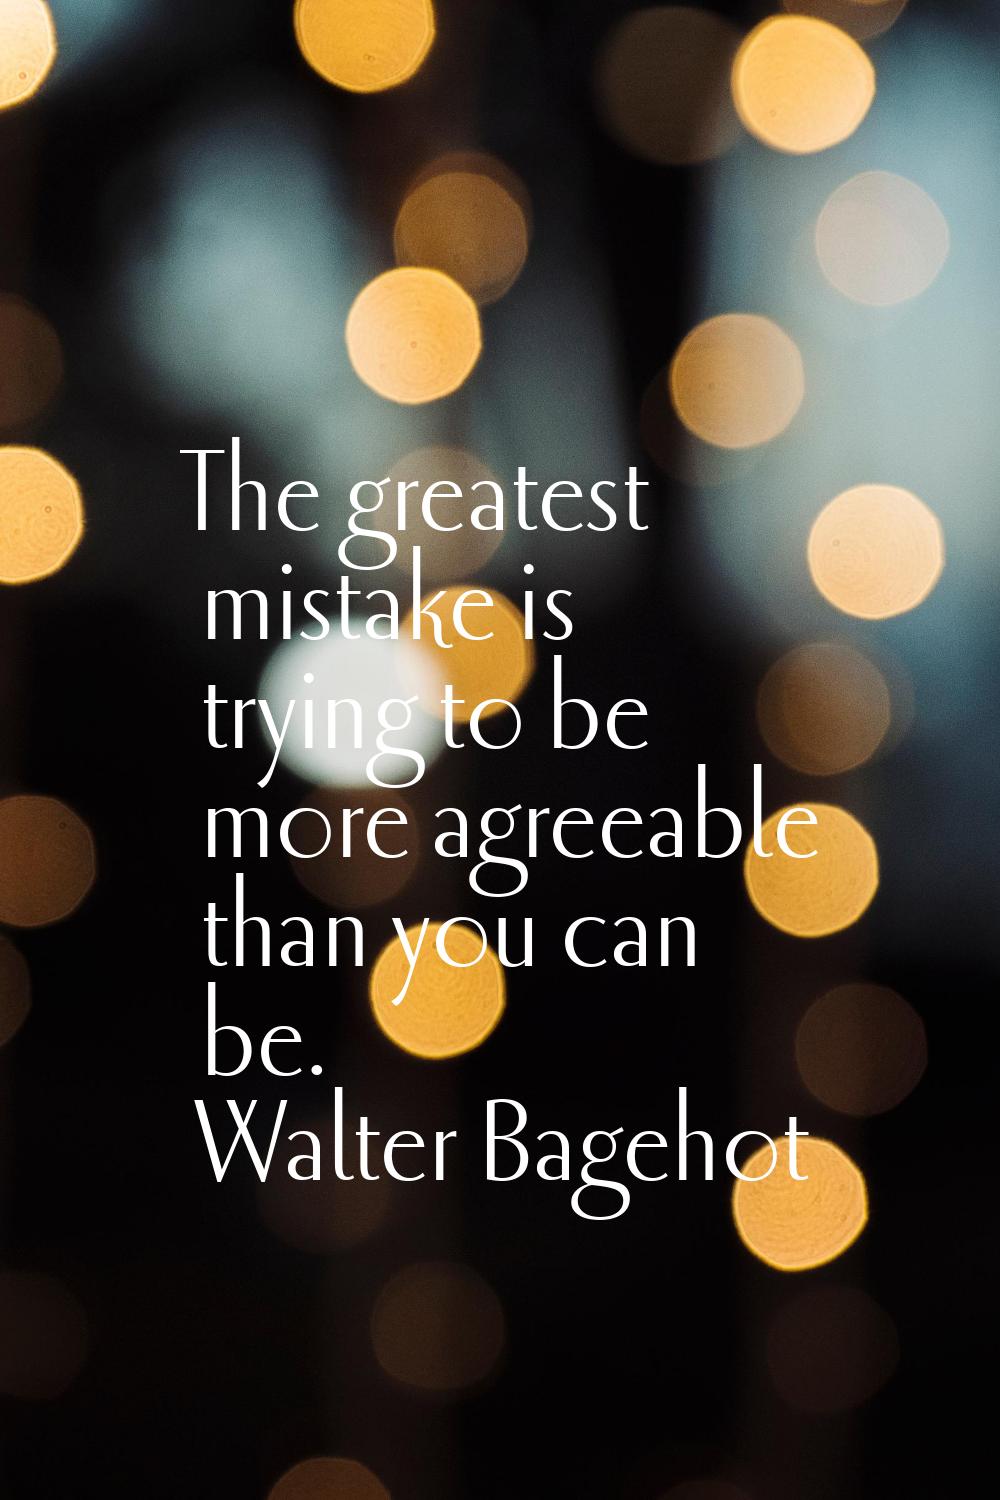 The greatest mistake is trying to be more agreeable than you can be.